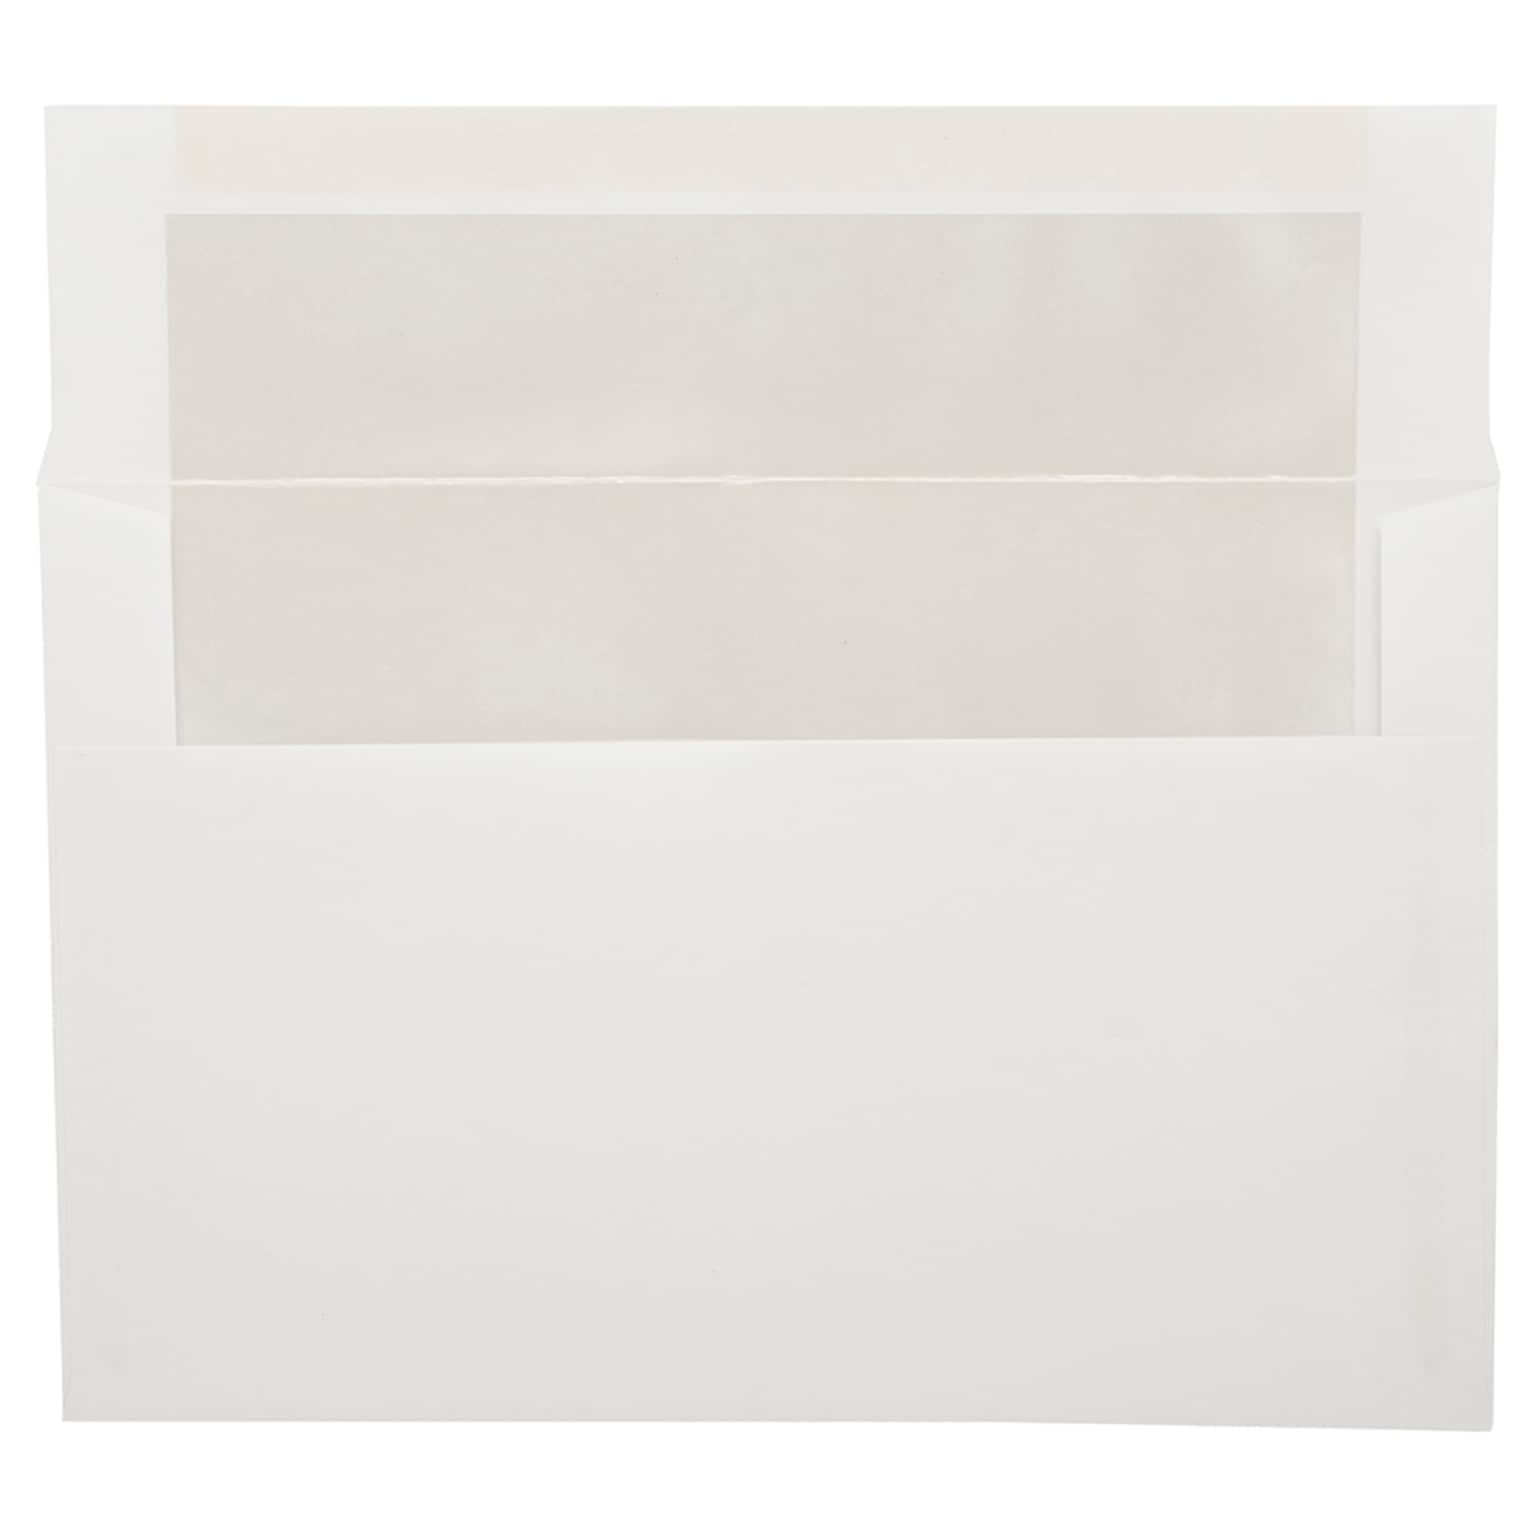 JAM Paper A9 Foil Lined Invitation Envelopes, 5.75 x 8.75, White with Ivory Foil, 25/Pack (532412546)